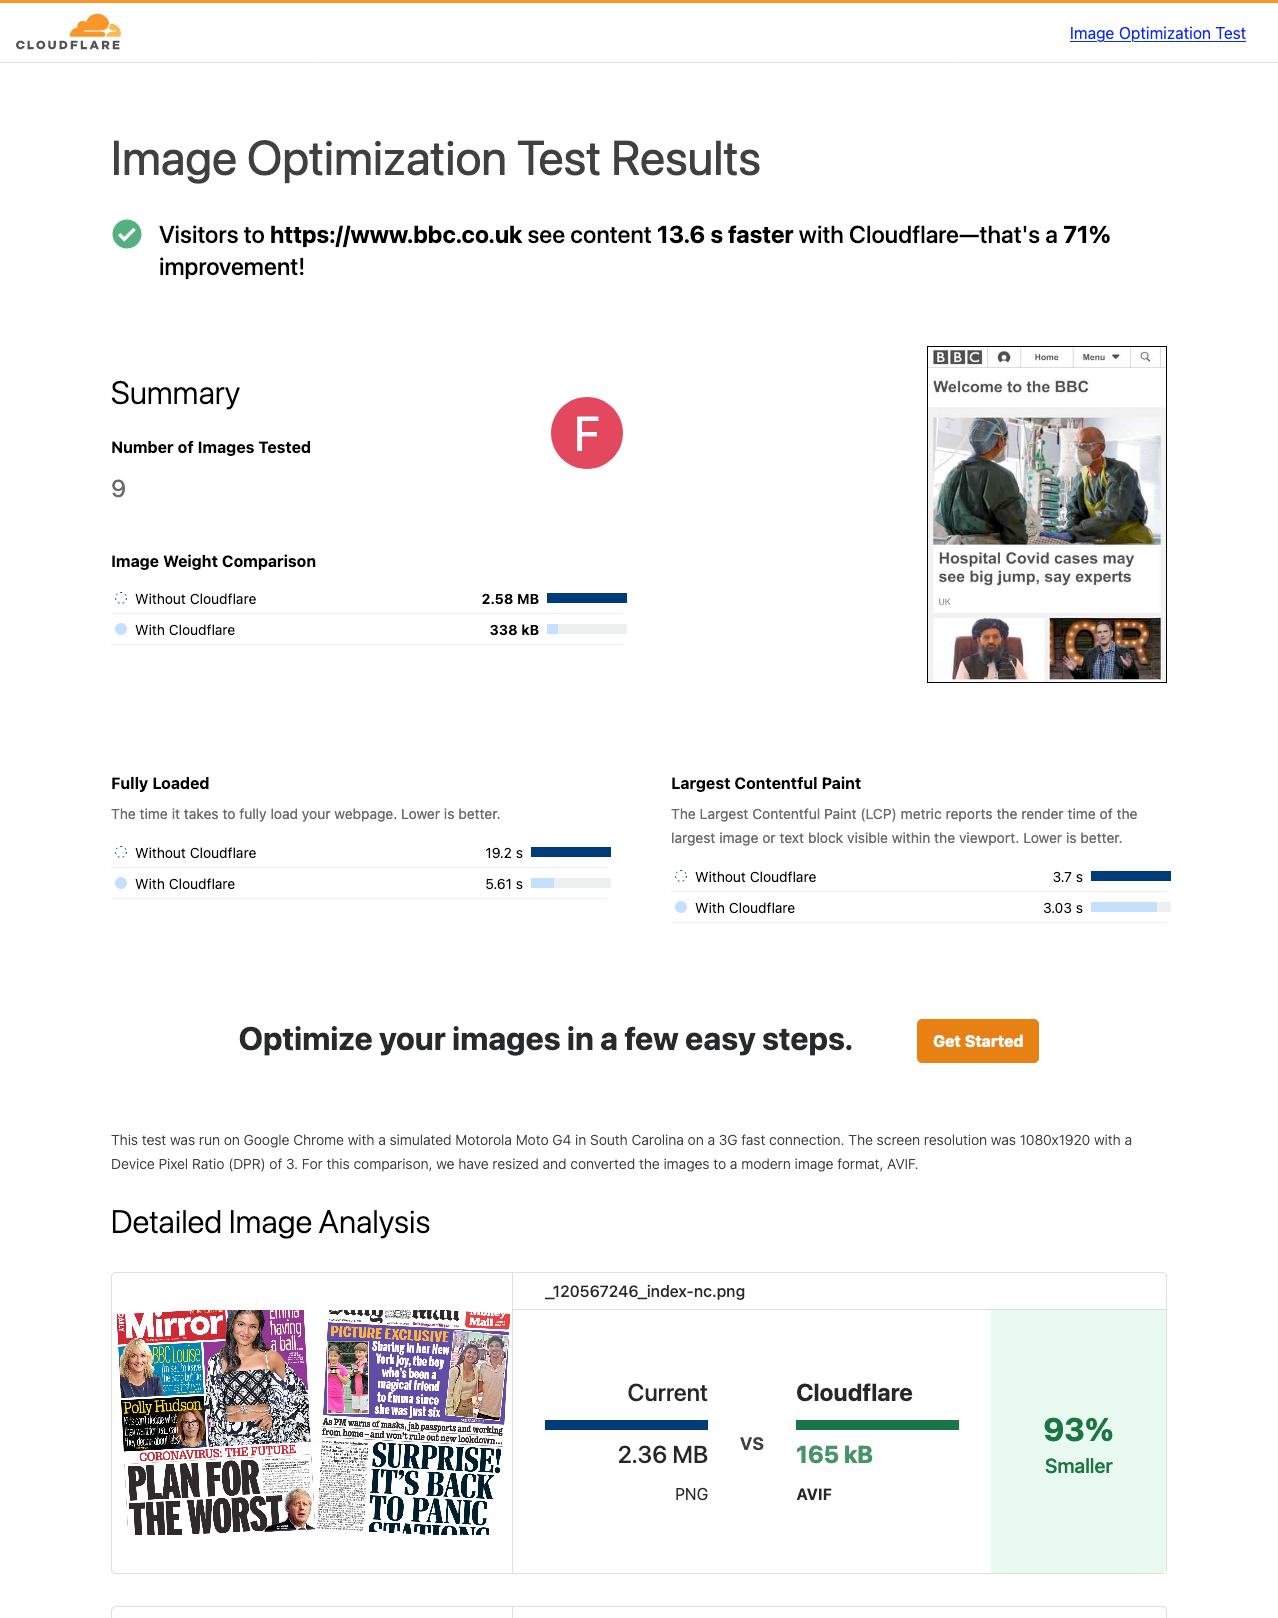 Example screenshot of Cloudflare's Image Optimization Test Results